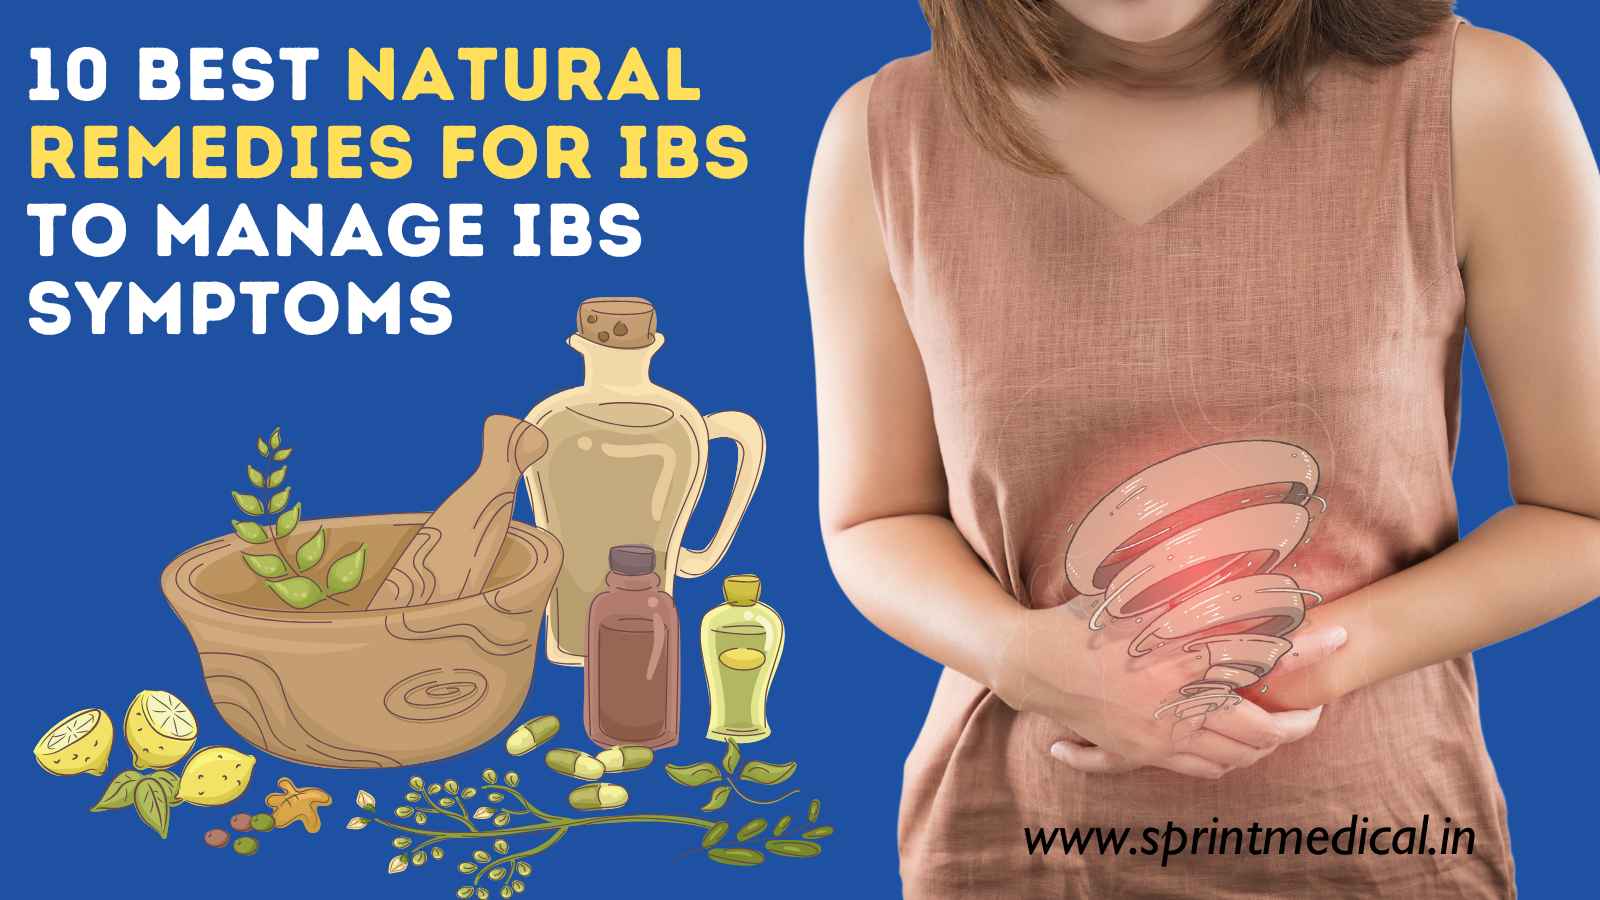 10 Best Natural Remedies for IBS to manage IBS SYMPTOMS